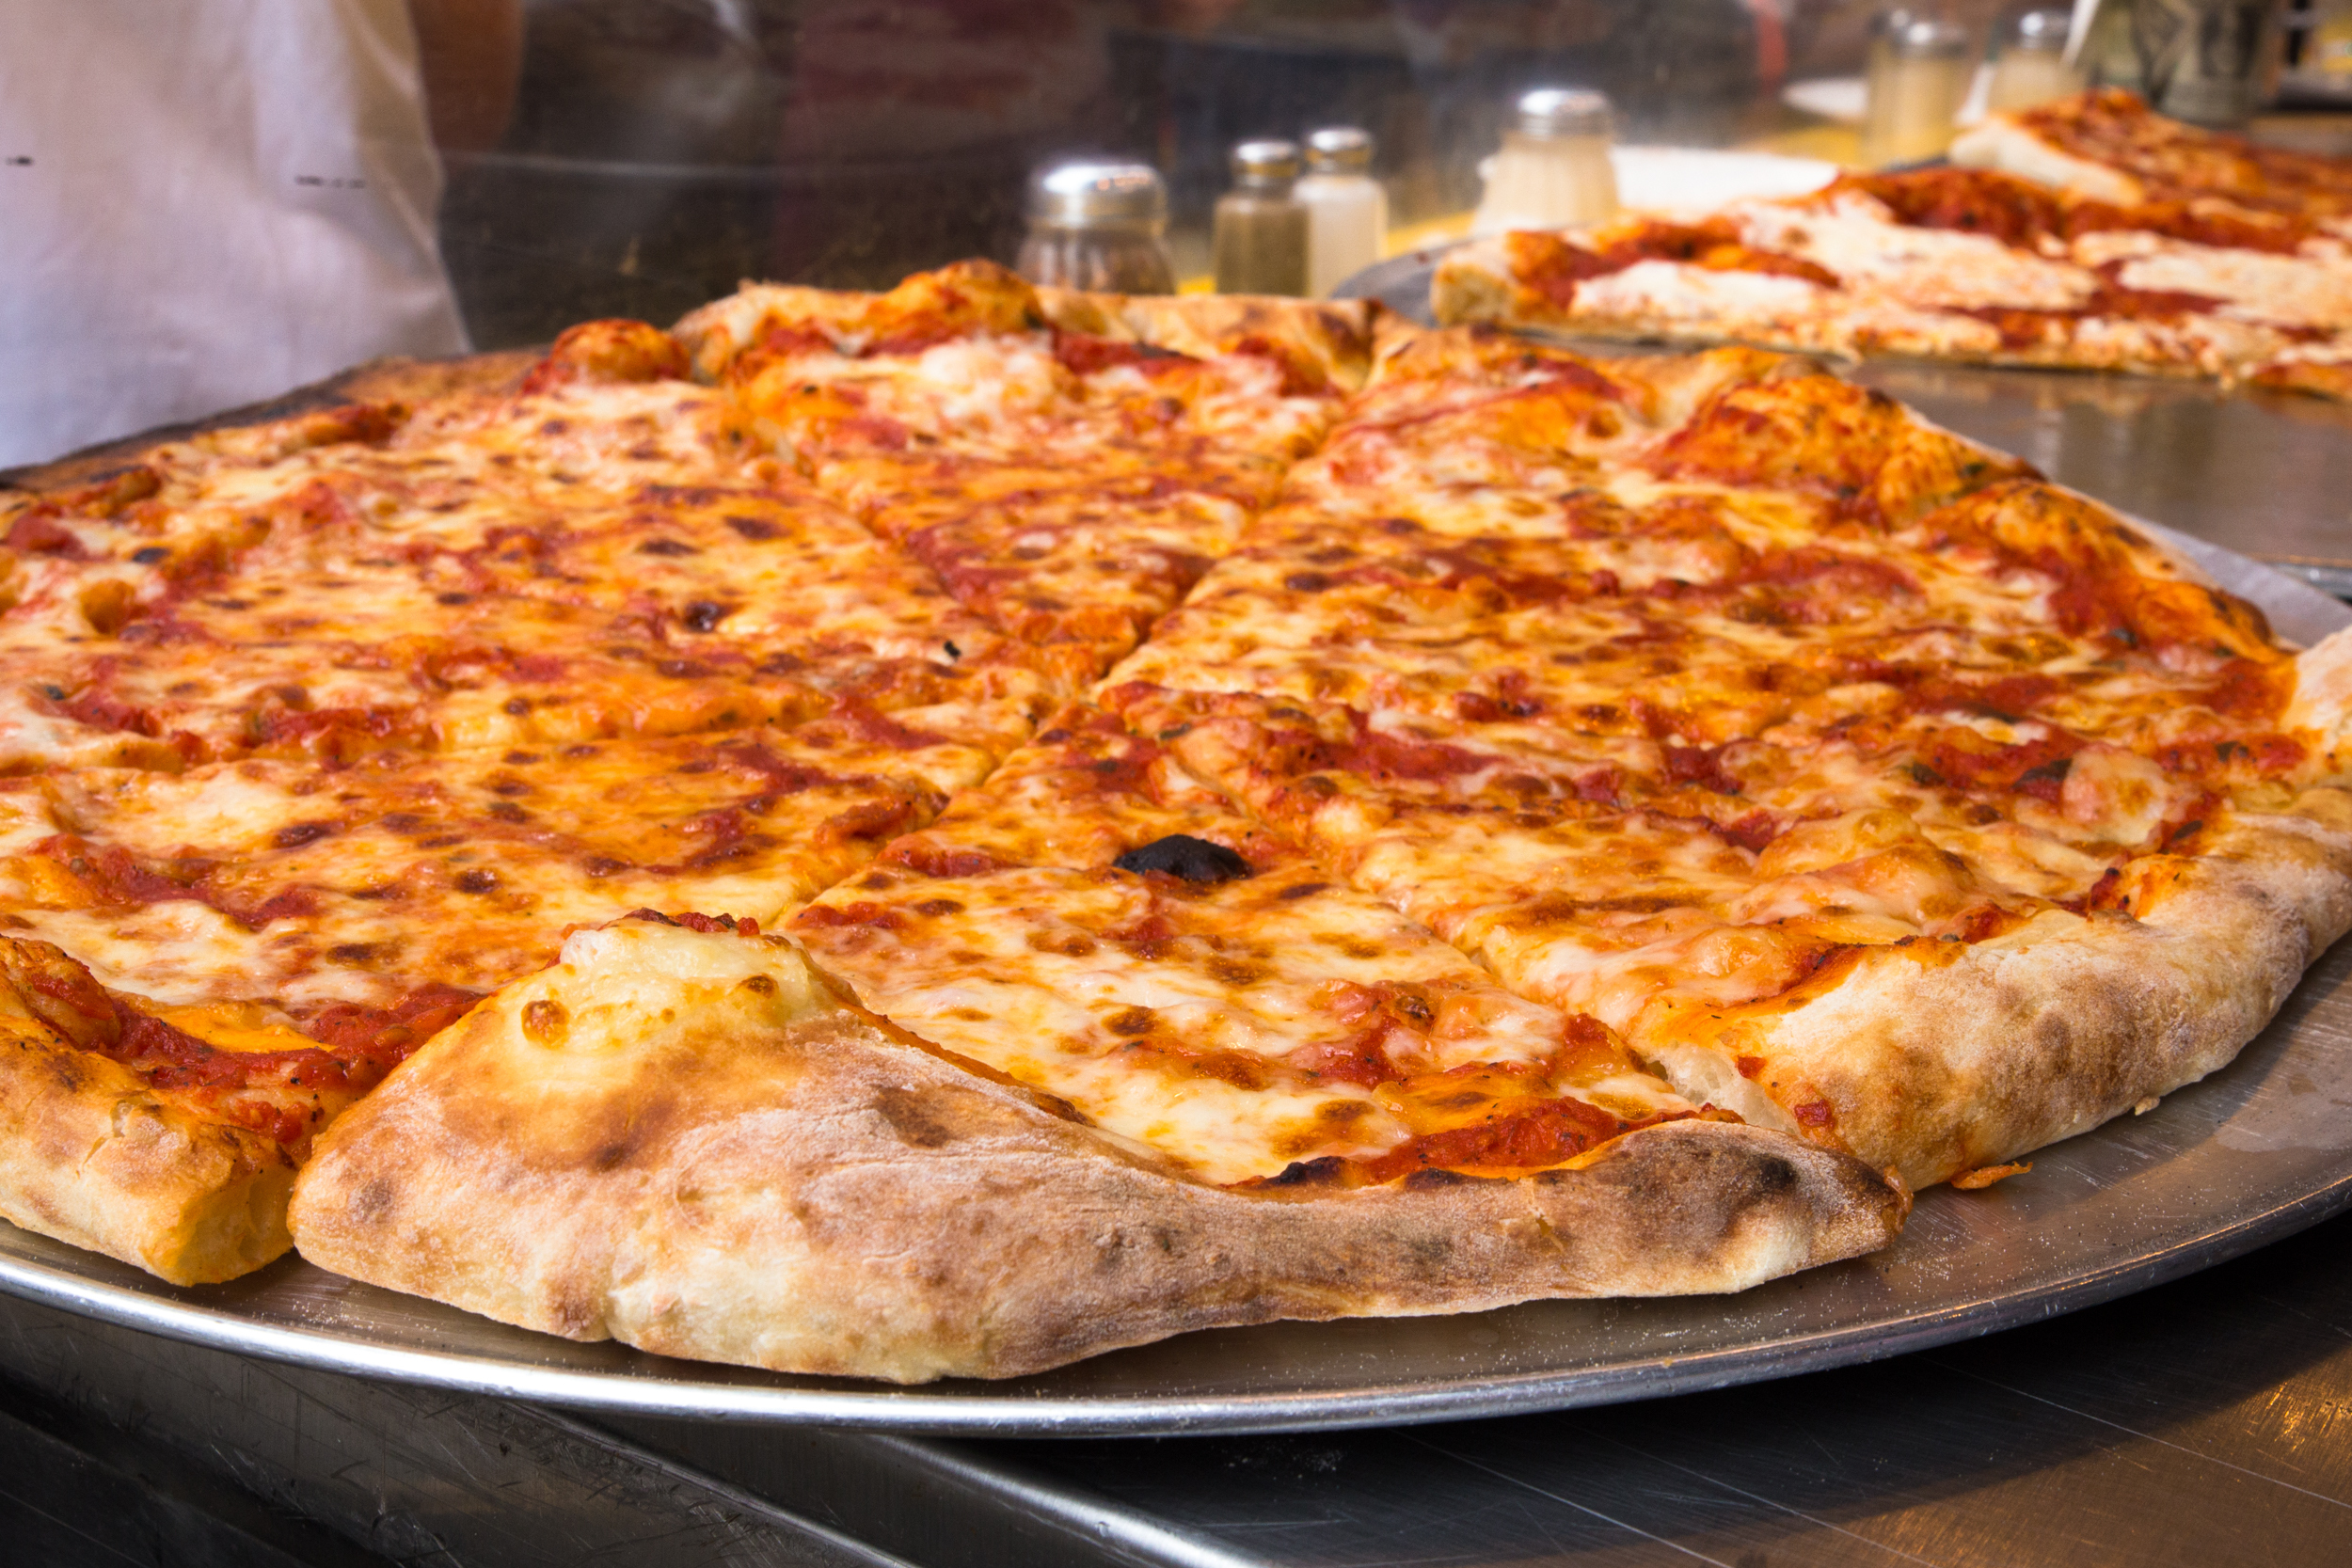 NYC is home to the most expensive pizza in the country